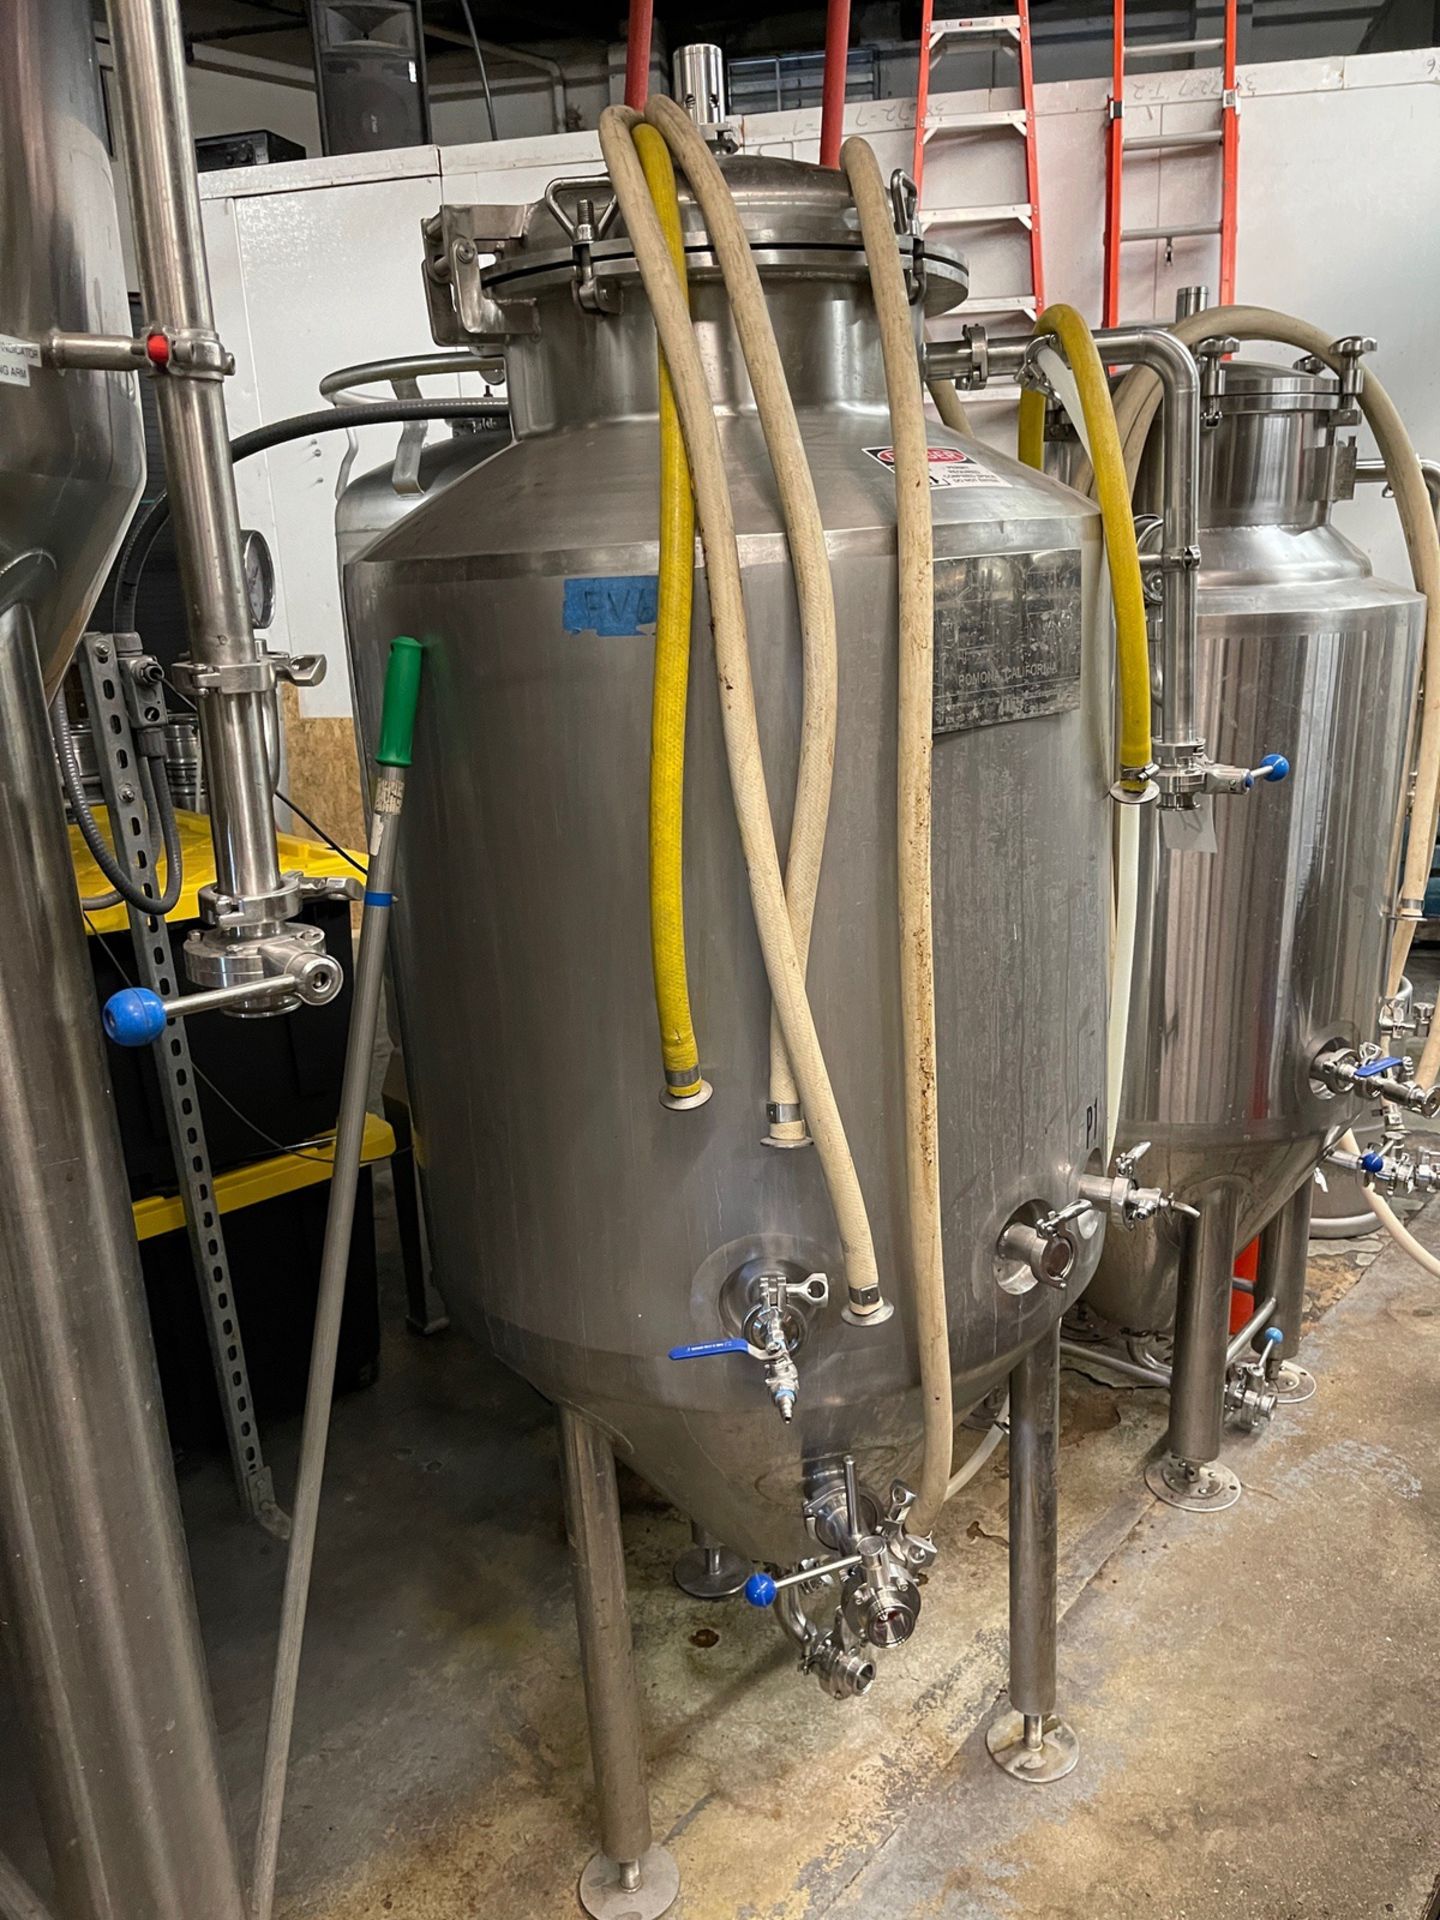 2012 Pacific Brewing 3 BBL Pilot System Fermentation Vessel, Cone Bottom, Glycol Ja | Rig Fee $250 - Image 2 of 4